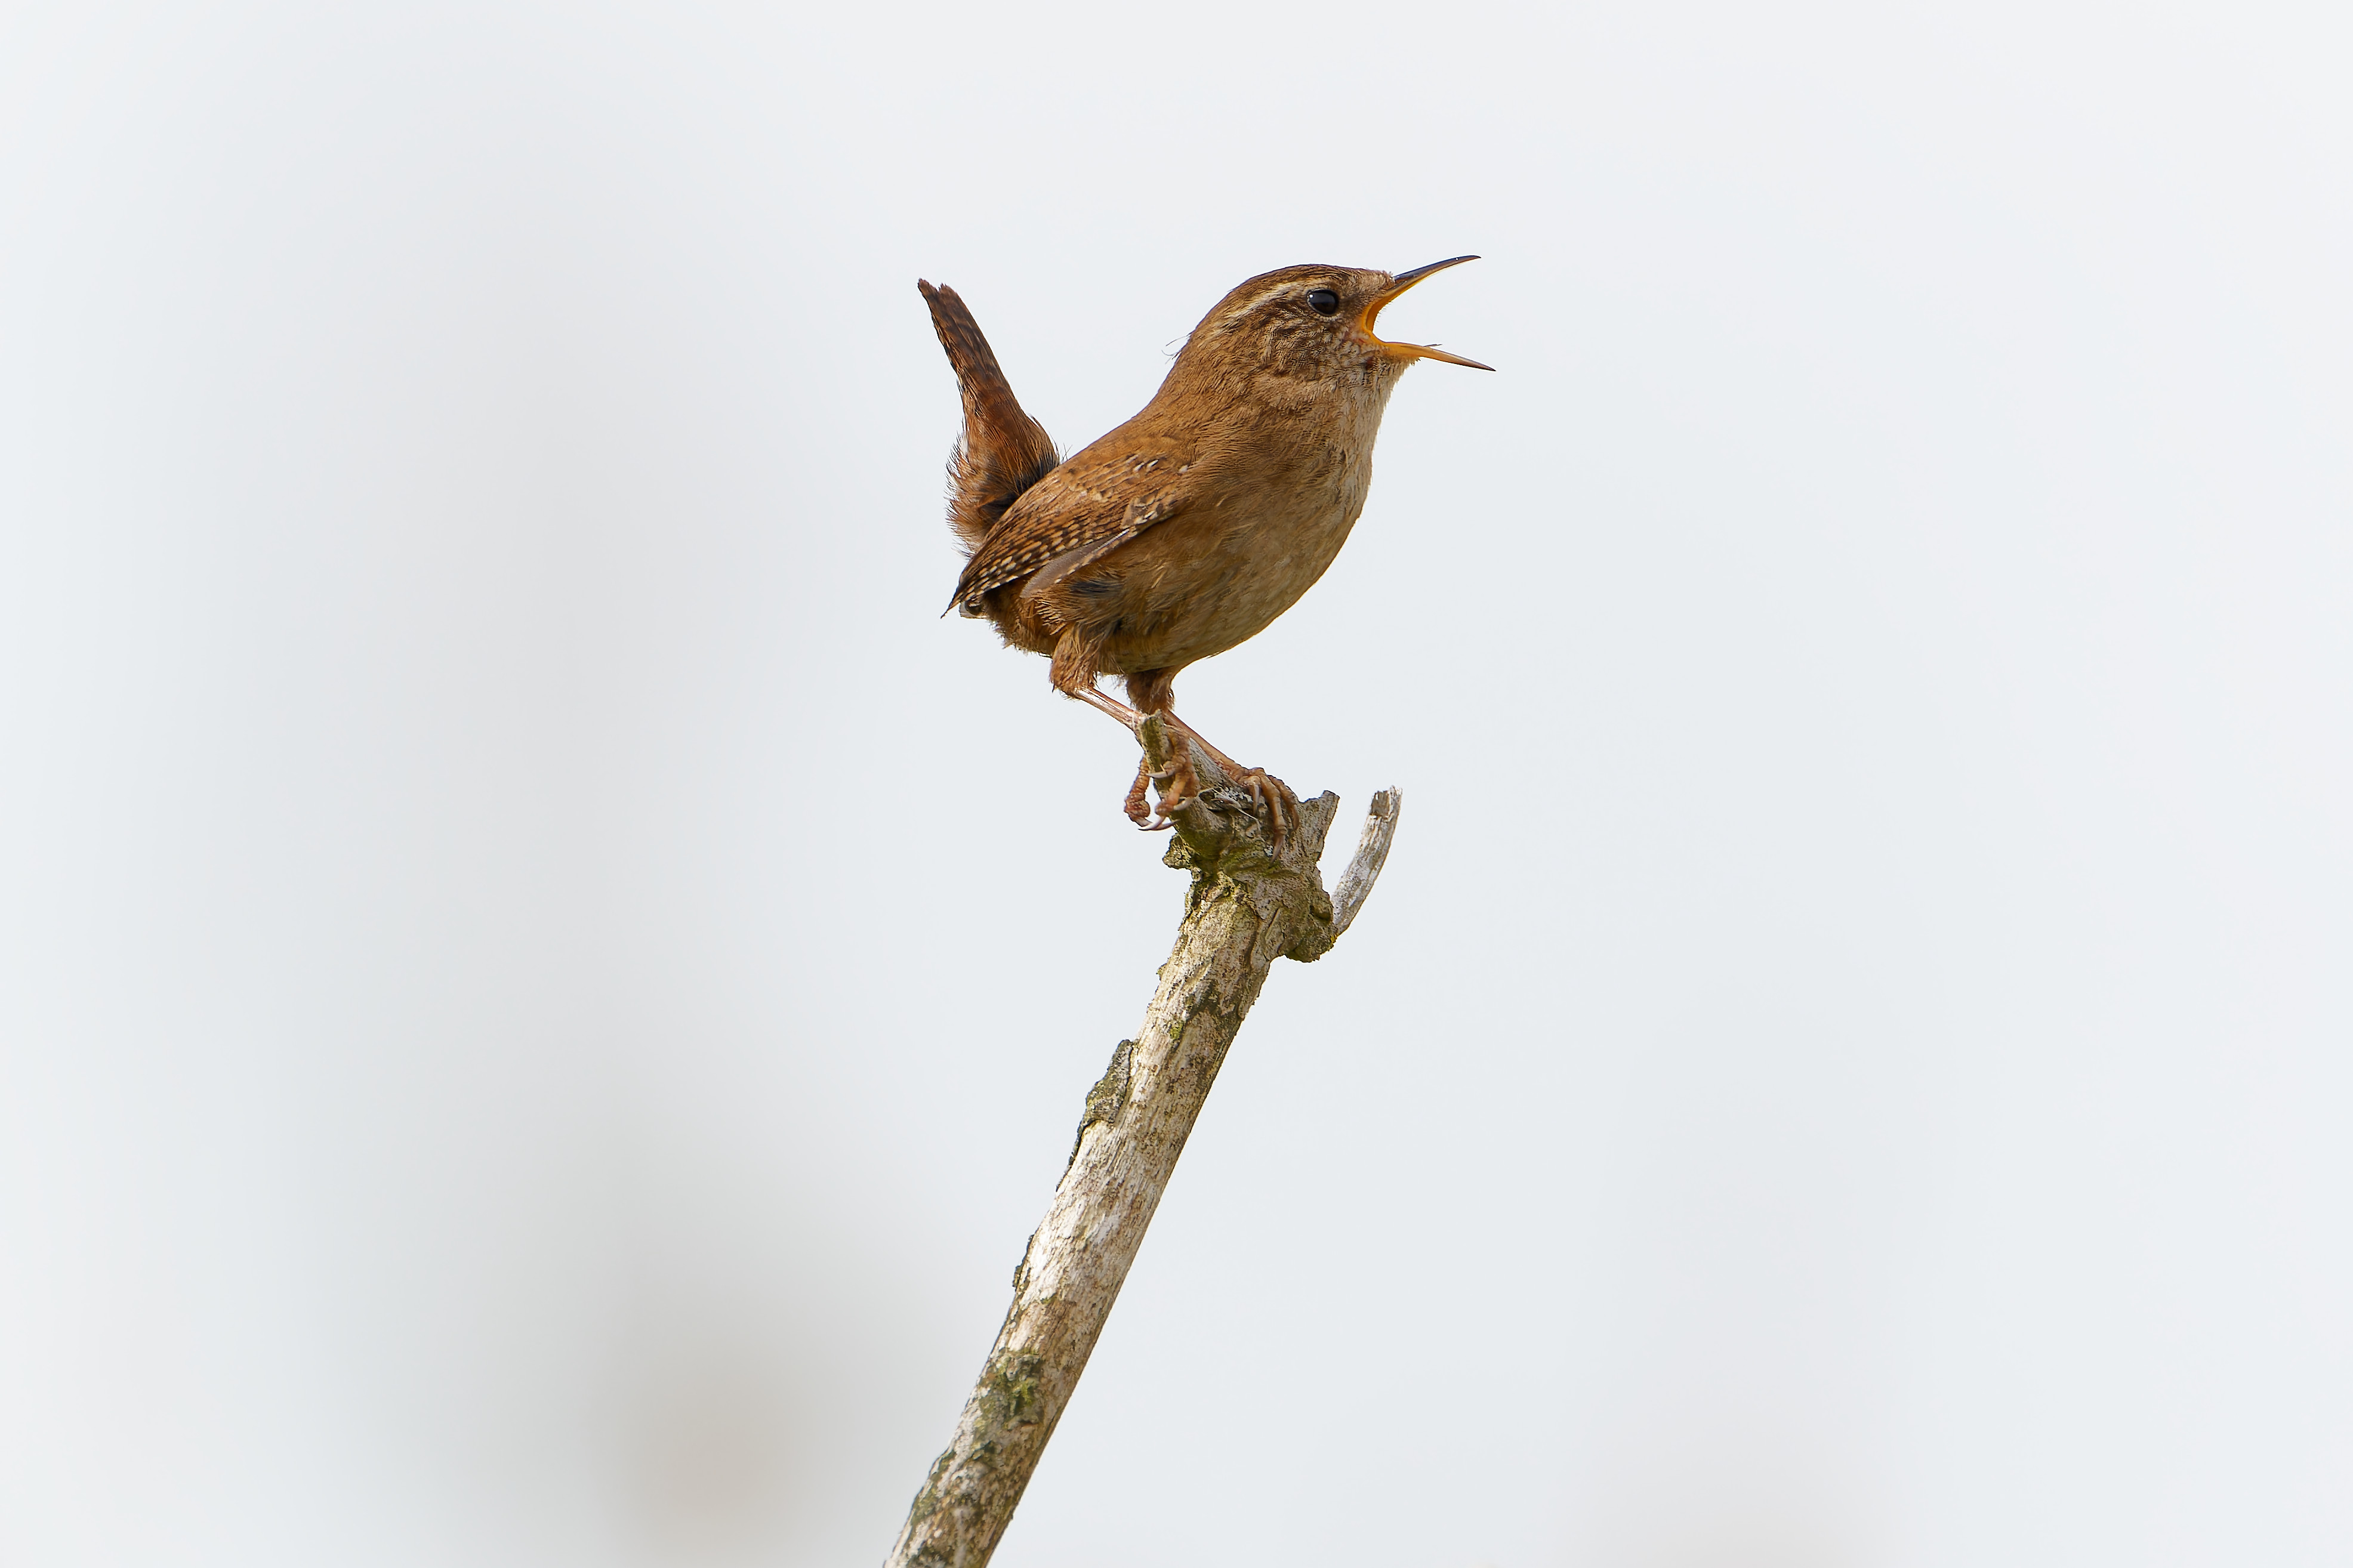 Wren singing his heart out